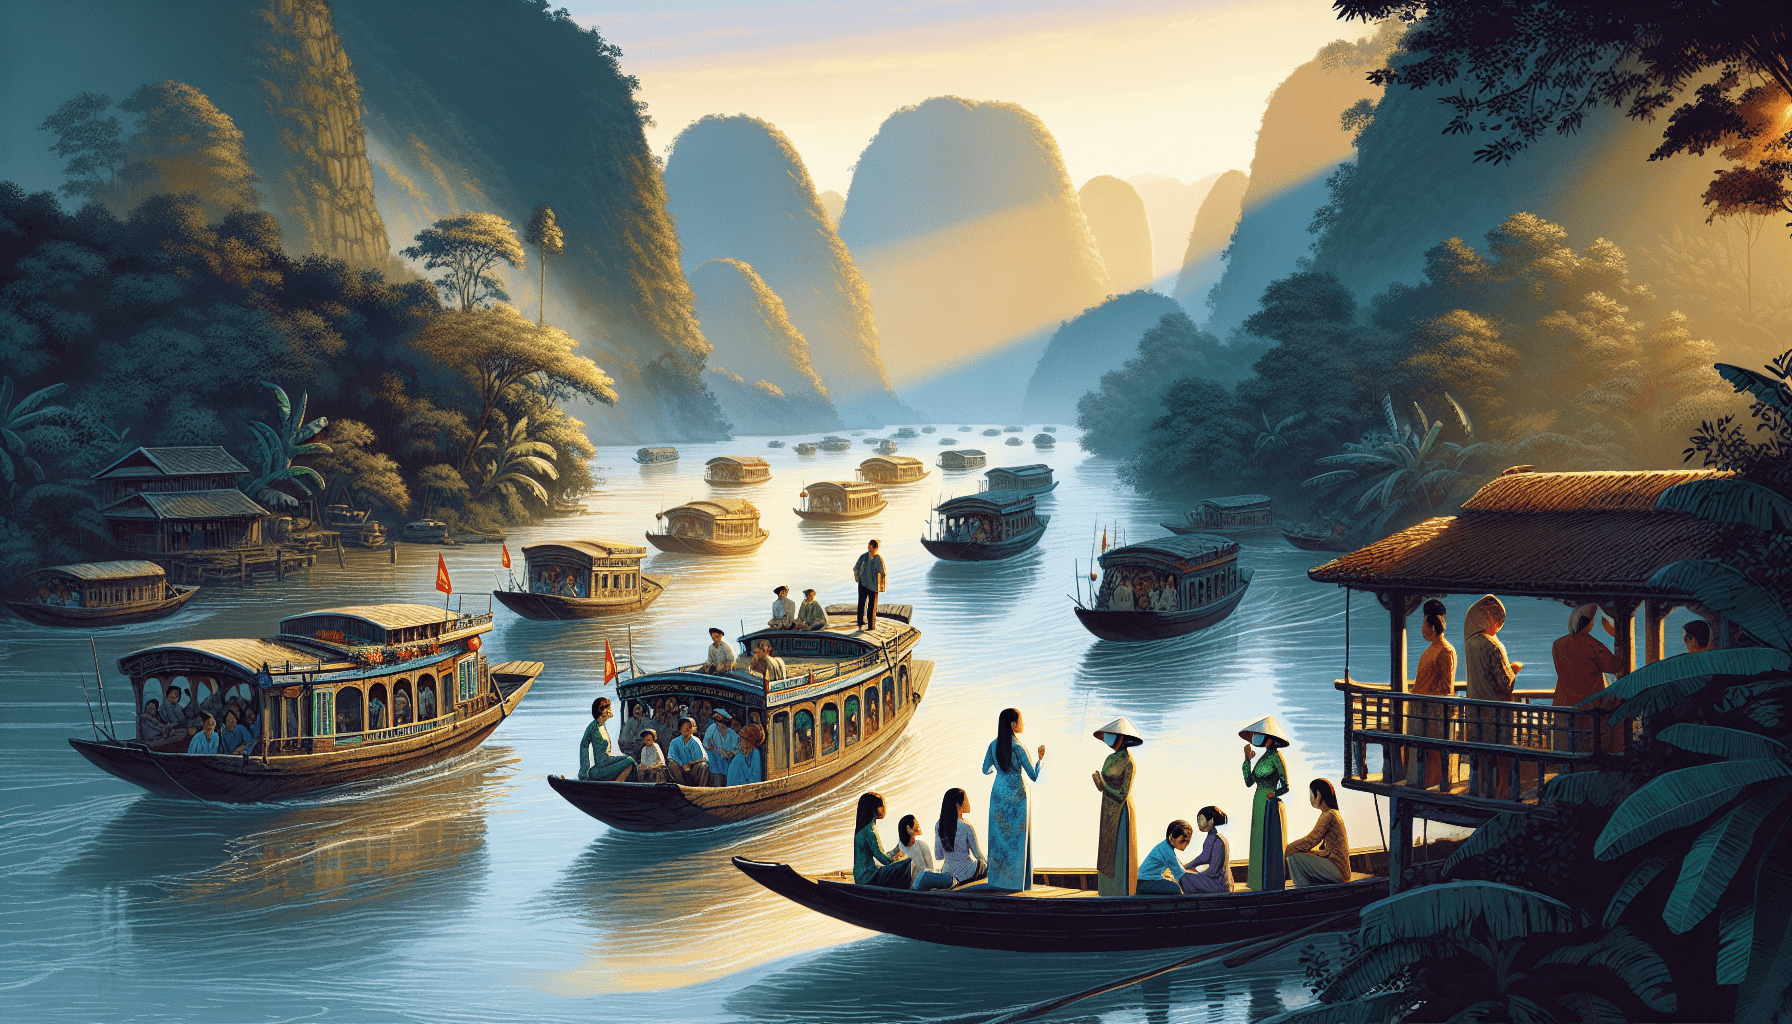 Who Does River Cruises In Vietnam?